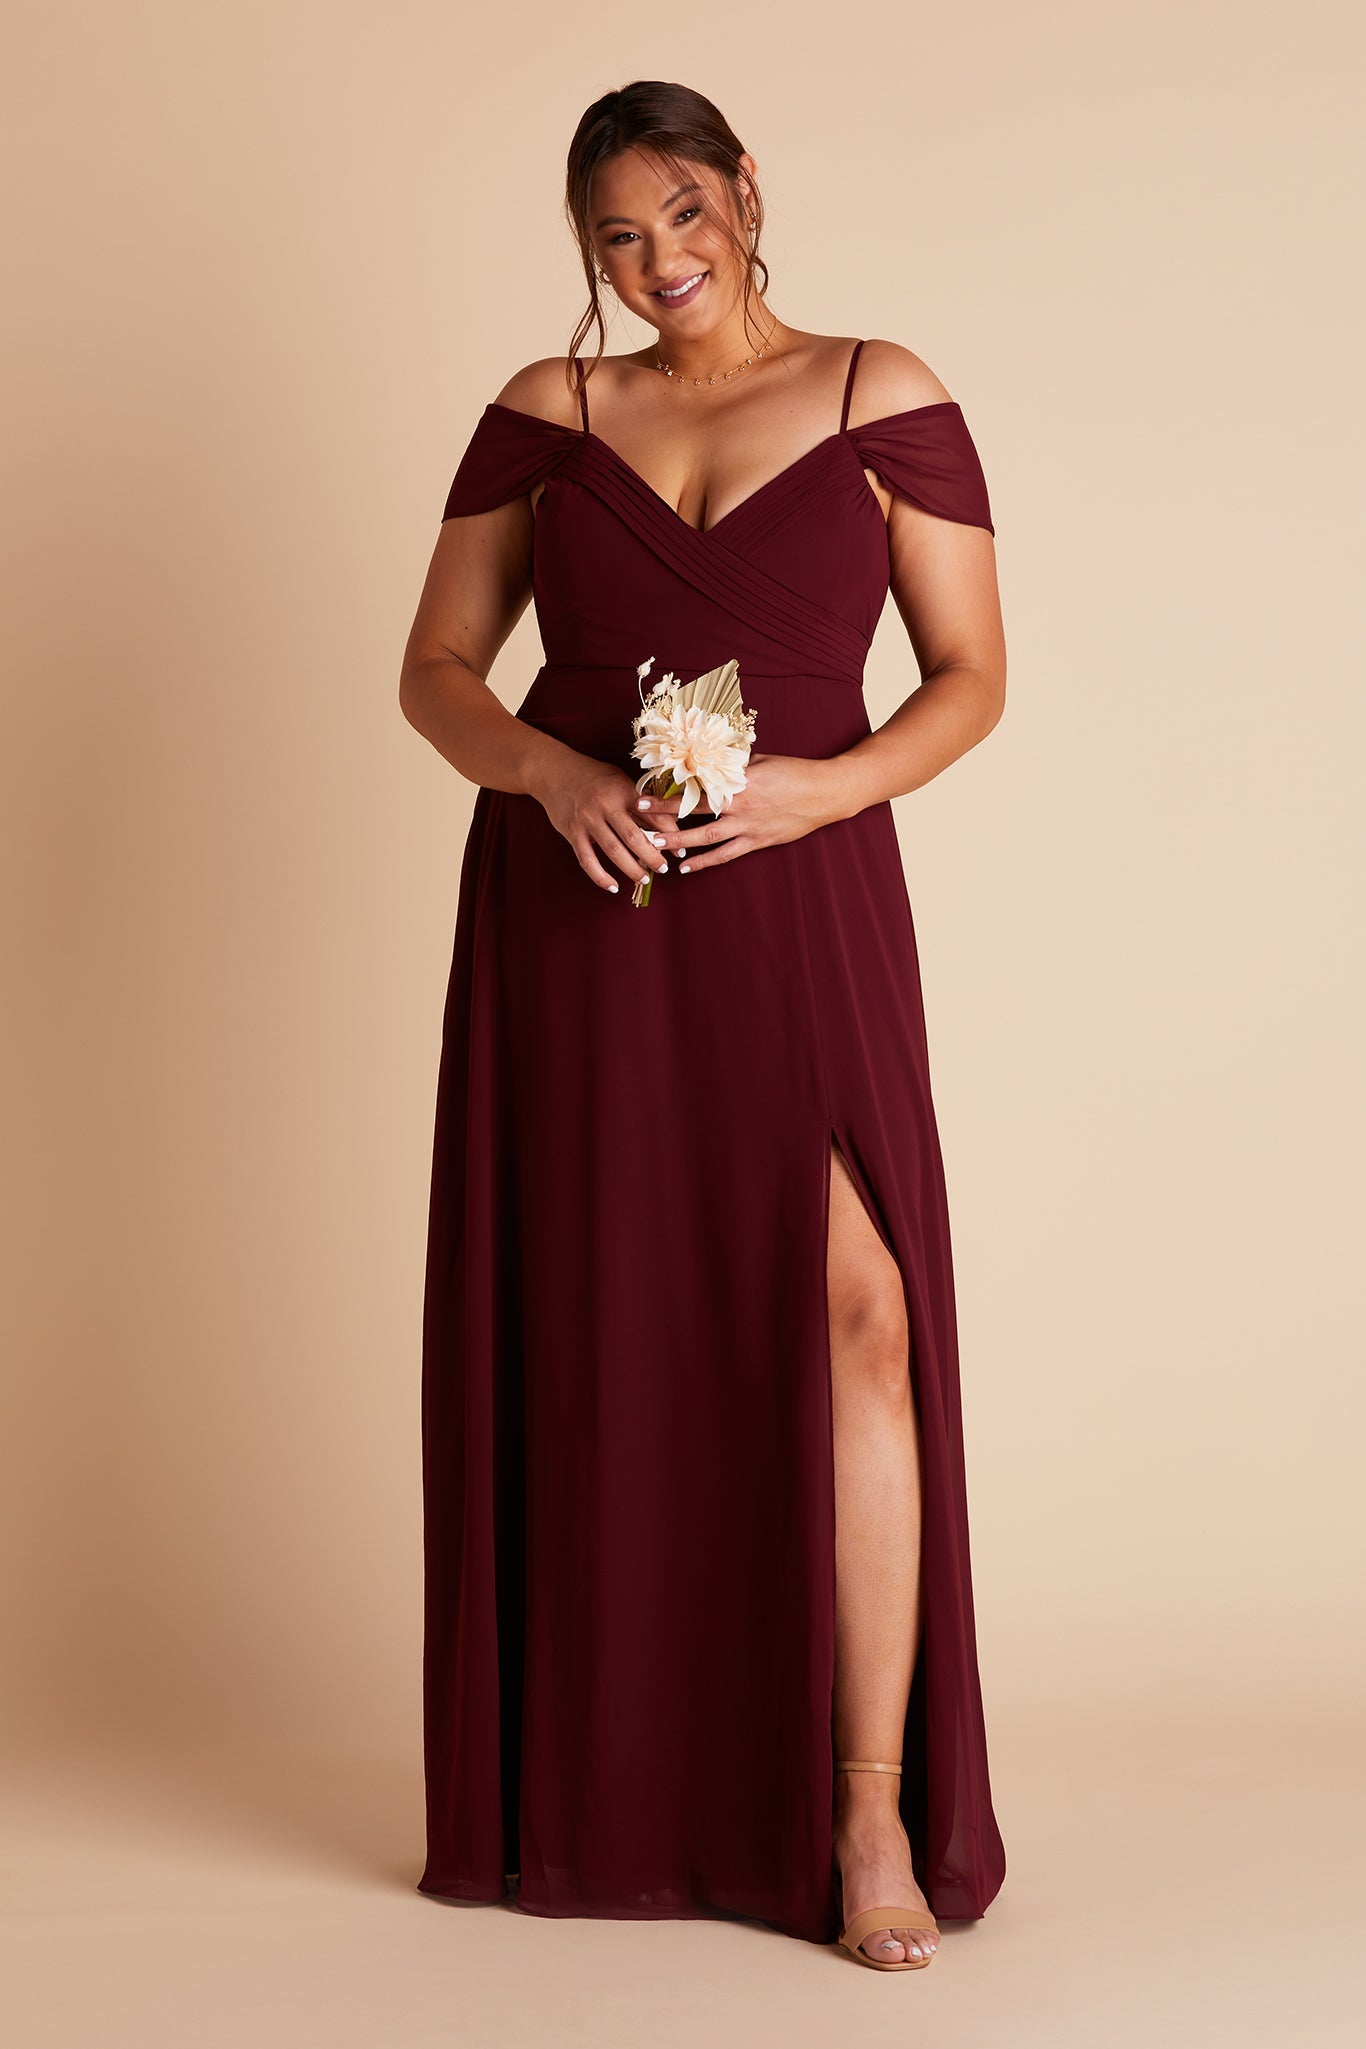 Spence convertible plus size bridesmaid dress in cabernet burgundy chiffon by Birdy Grey, front view